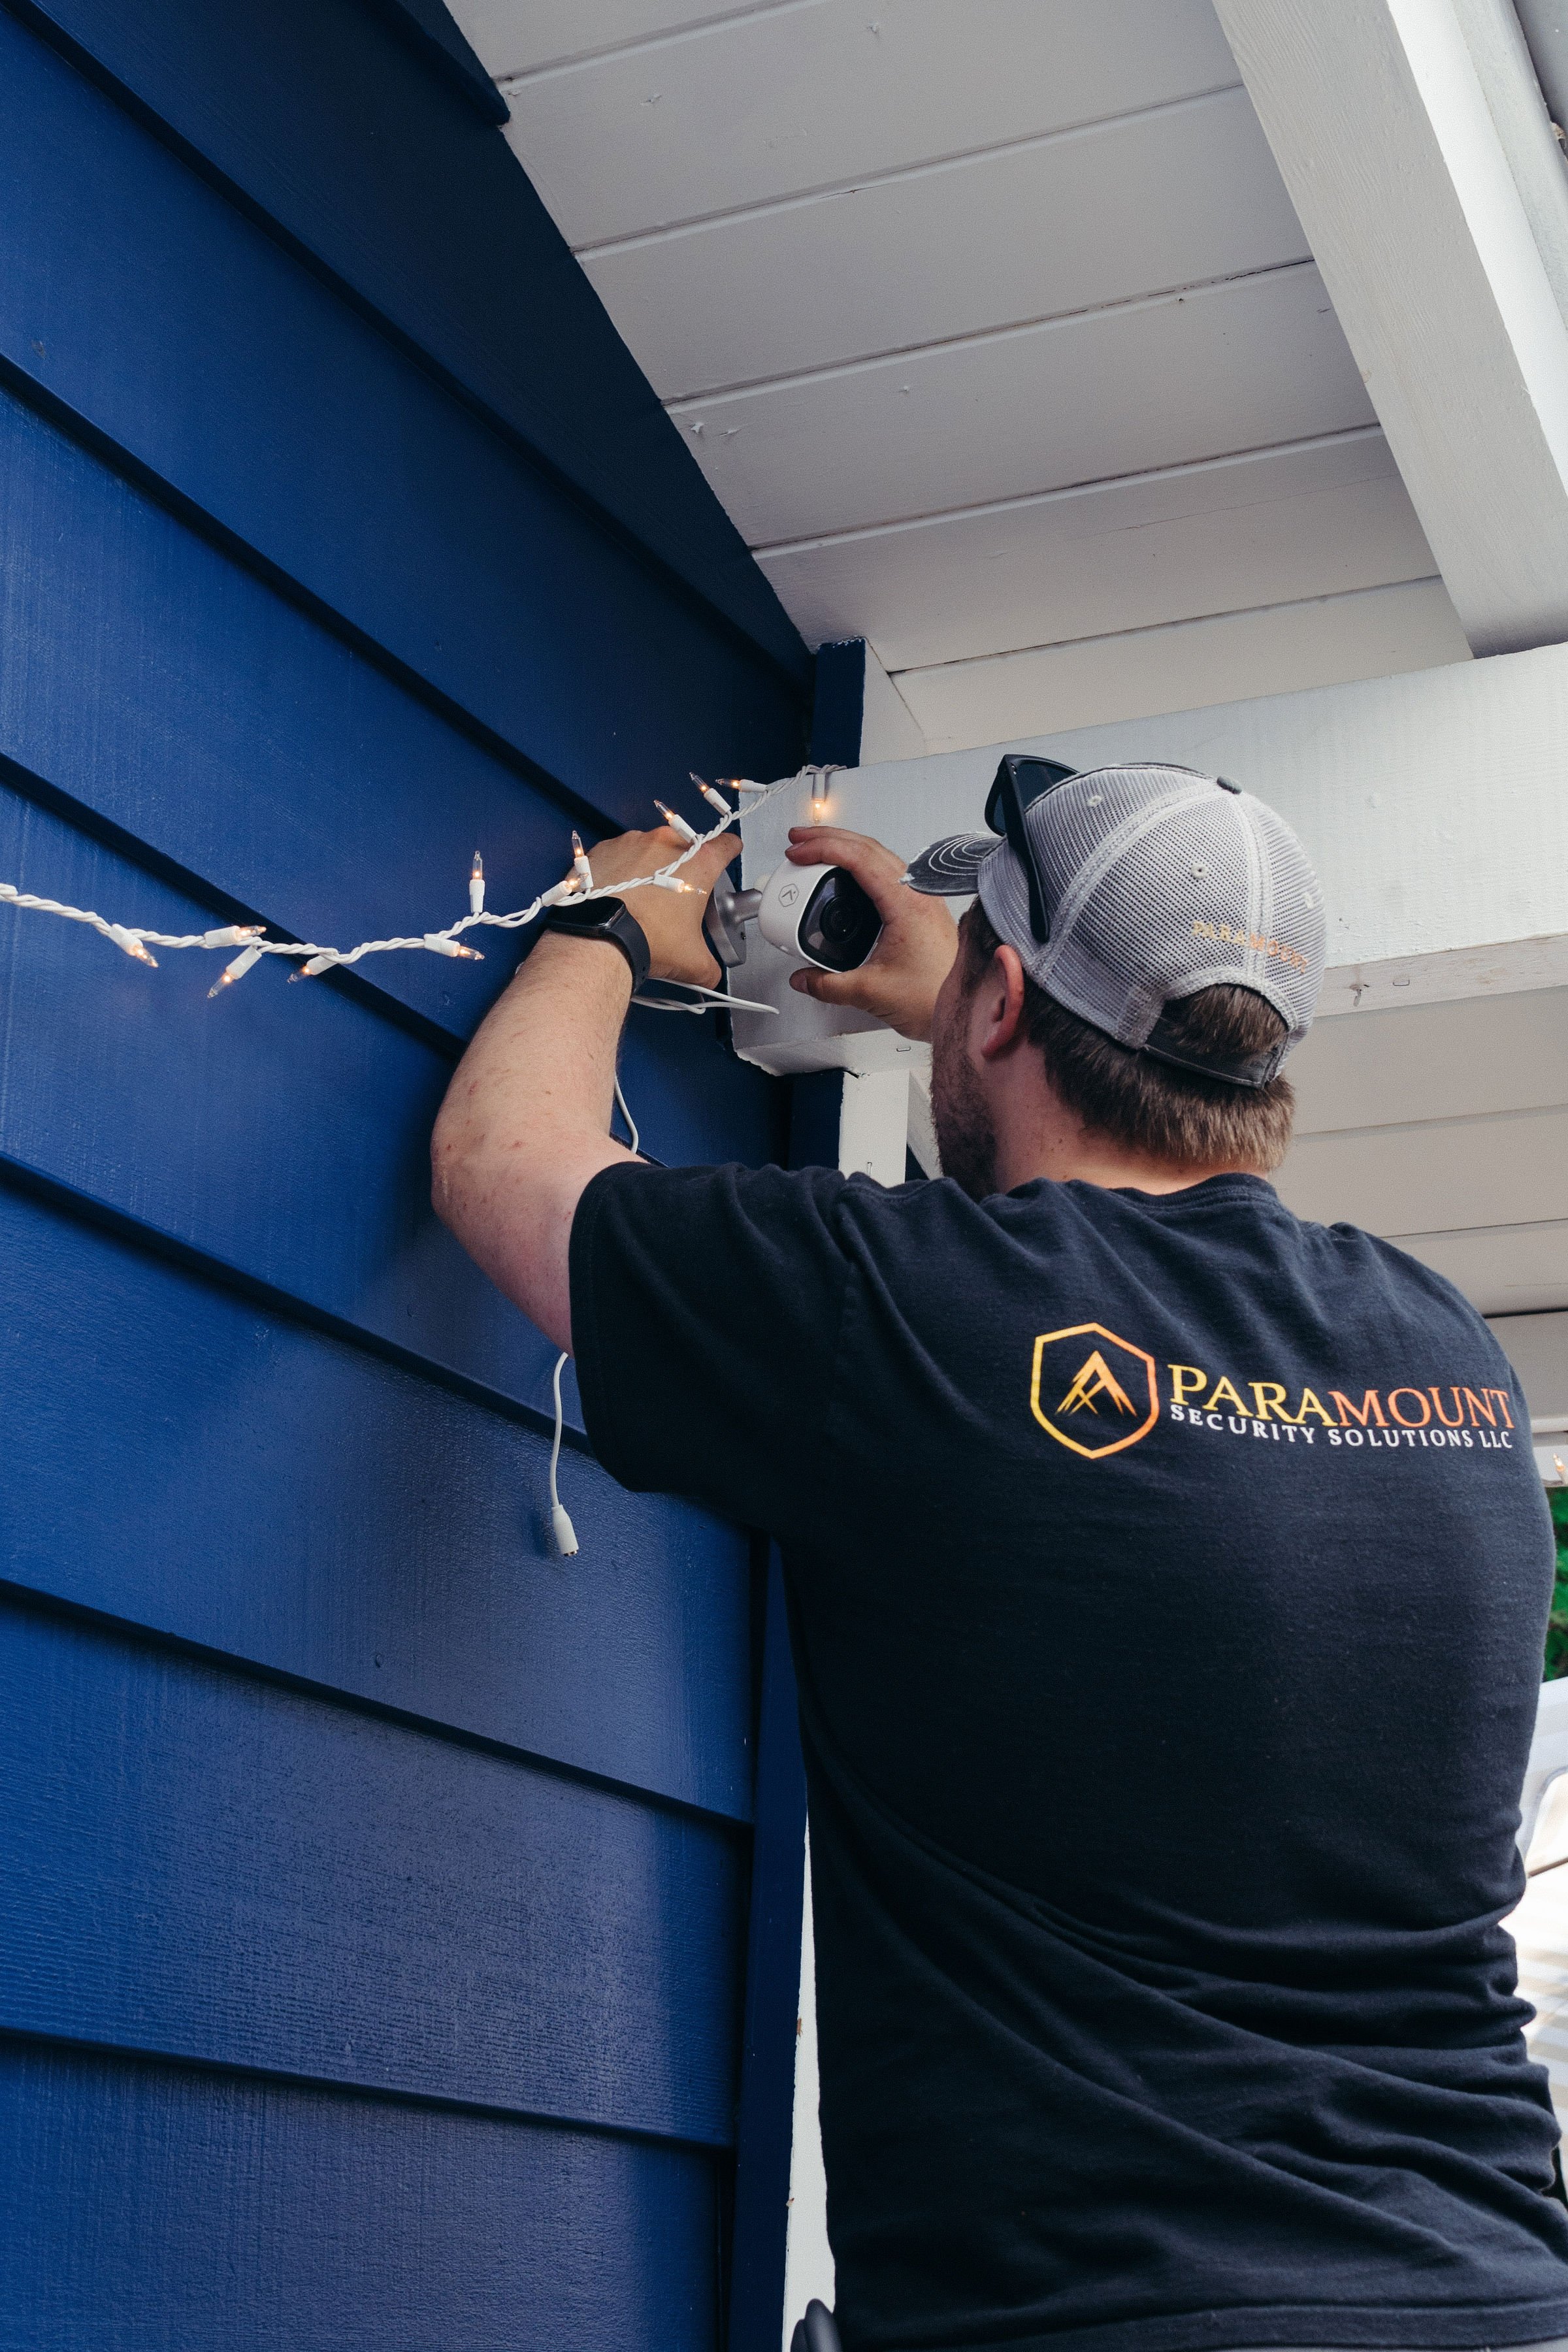 A worker installs a security camera on a house in this corporate branding photograph for brand workers in Portland